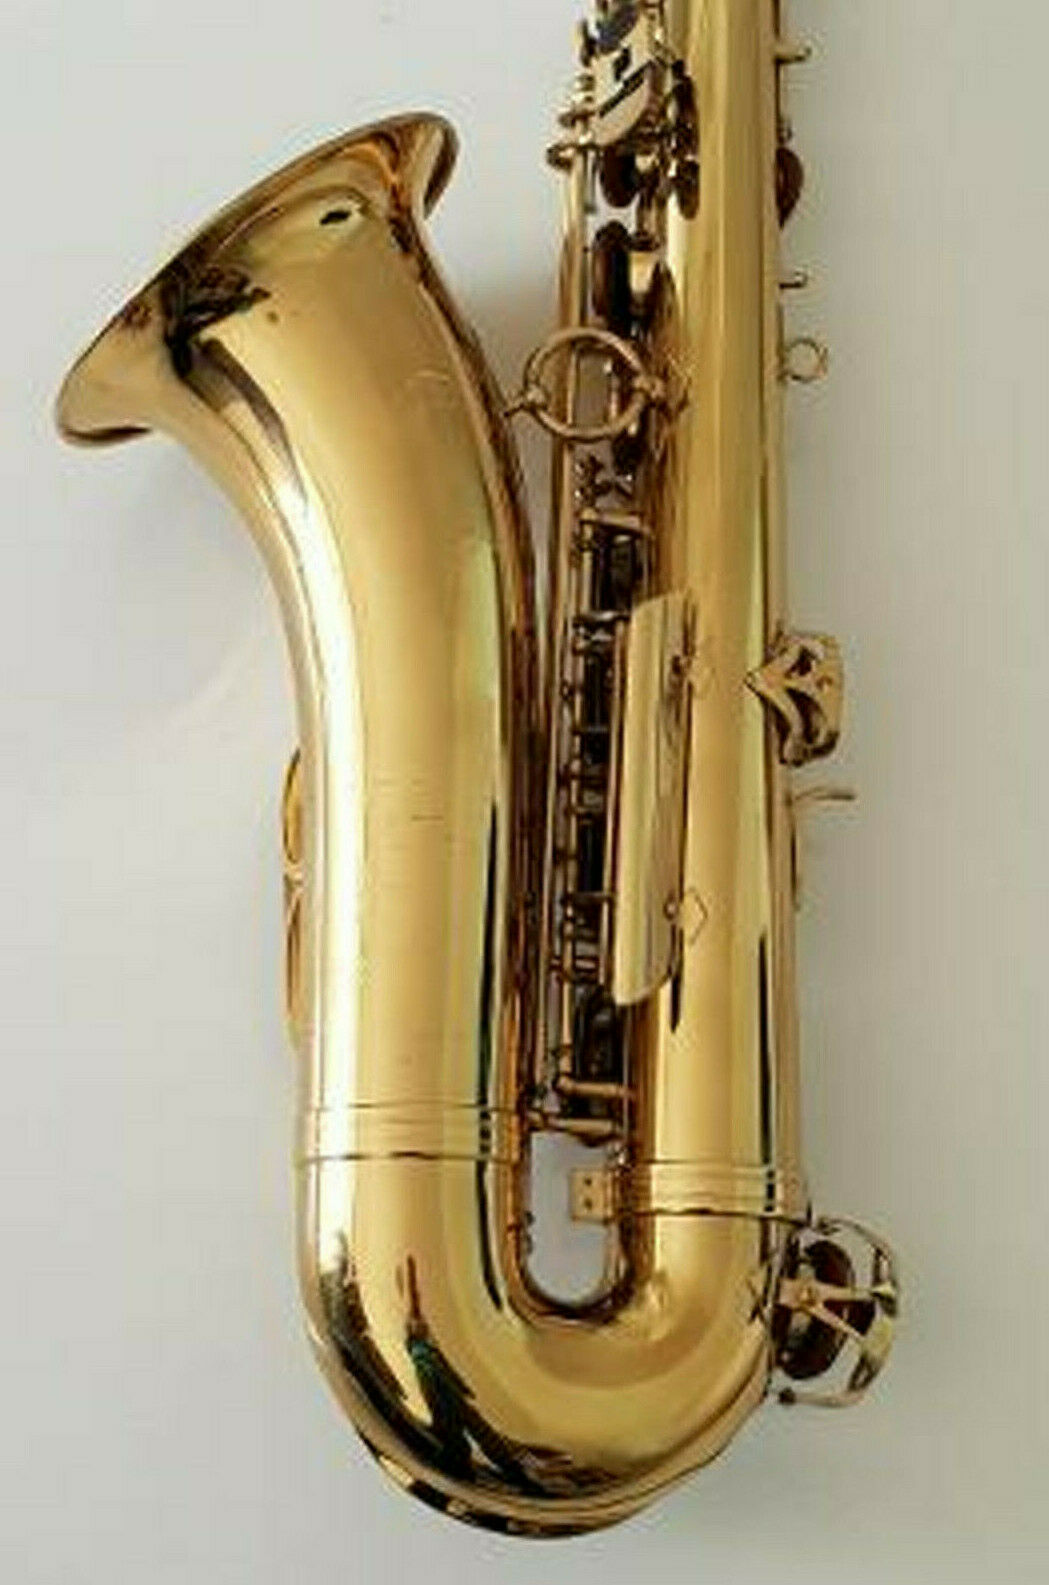 Saxophone Tenor Intermusic Bb Sax in Gold Finish & Hard Case Complete Outfit